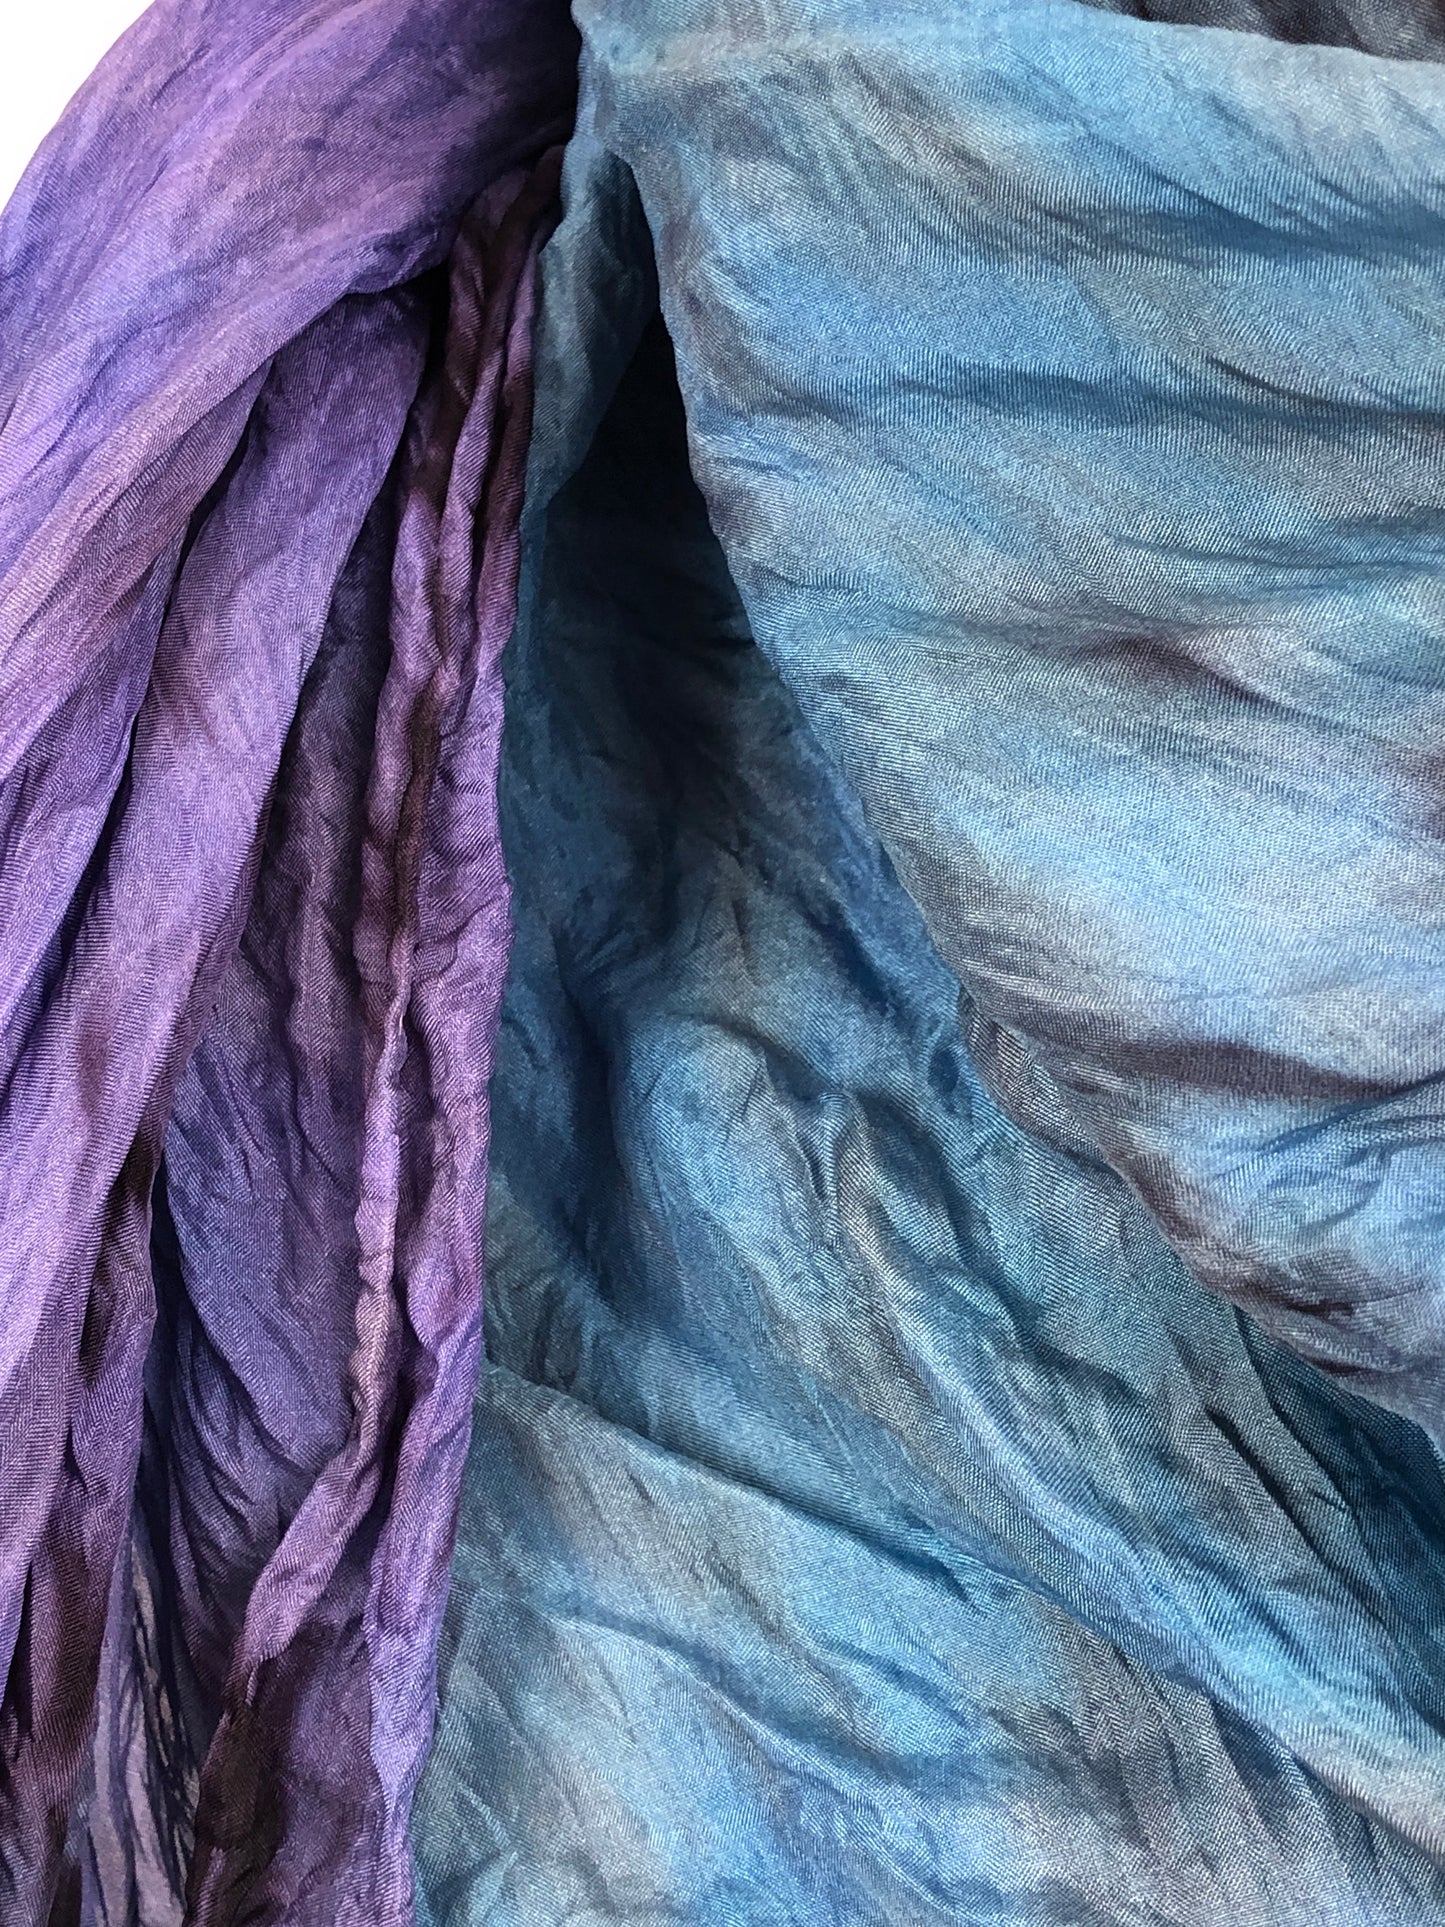 The “Activity Scarf” - hand-dyed silk scarf - $125